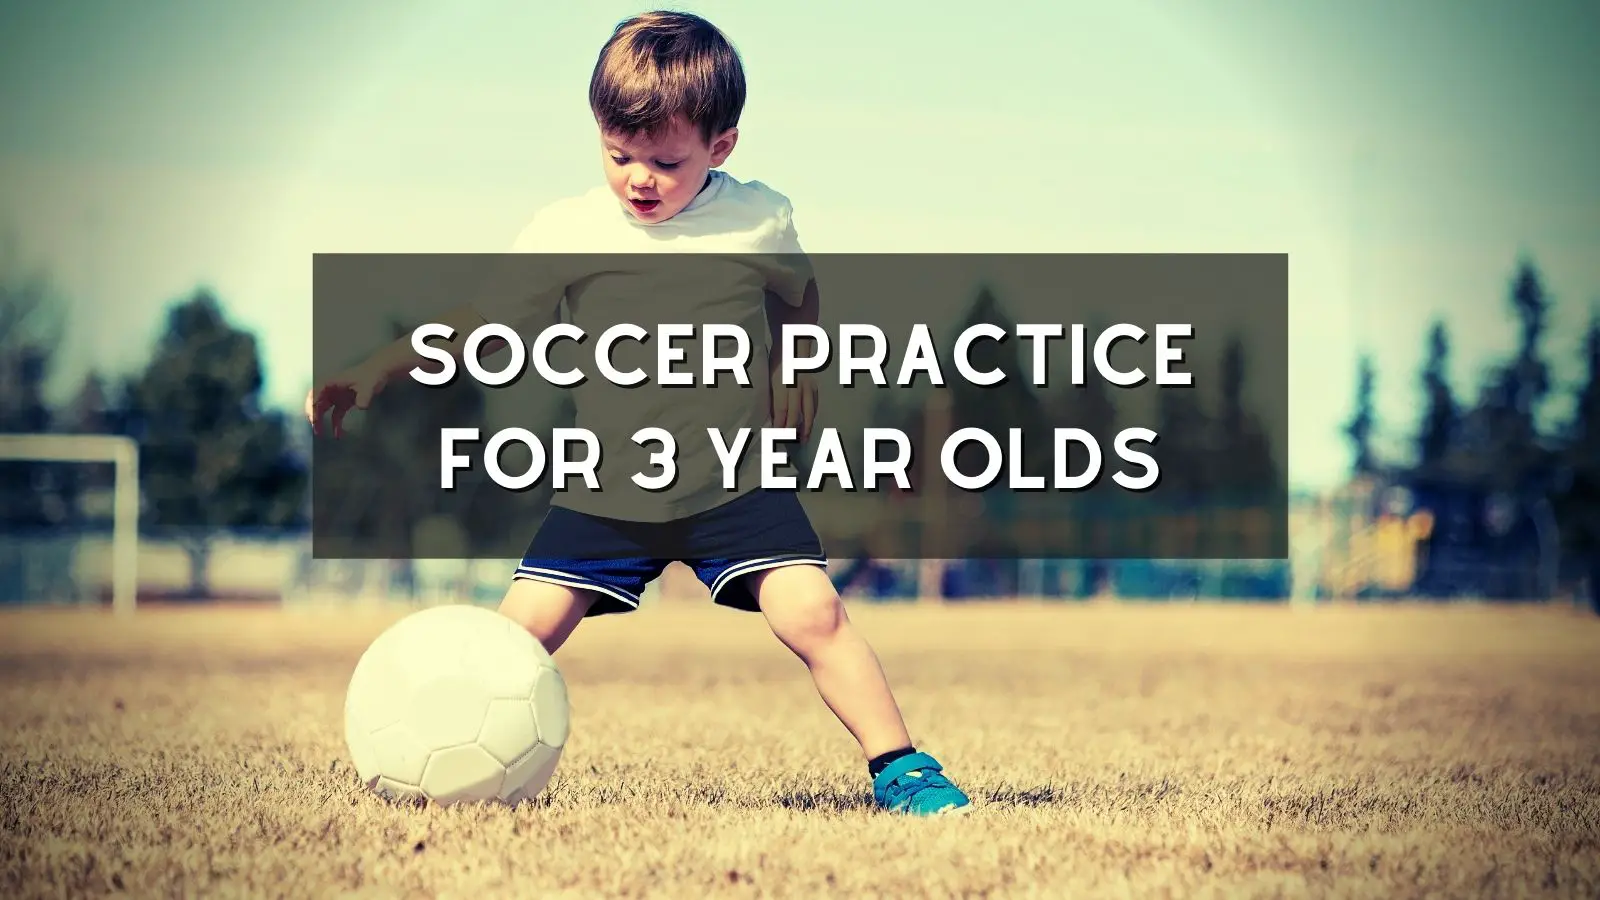 How to Handle Soccer Practice for 3 Year Olds